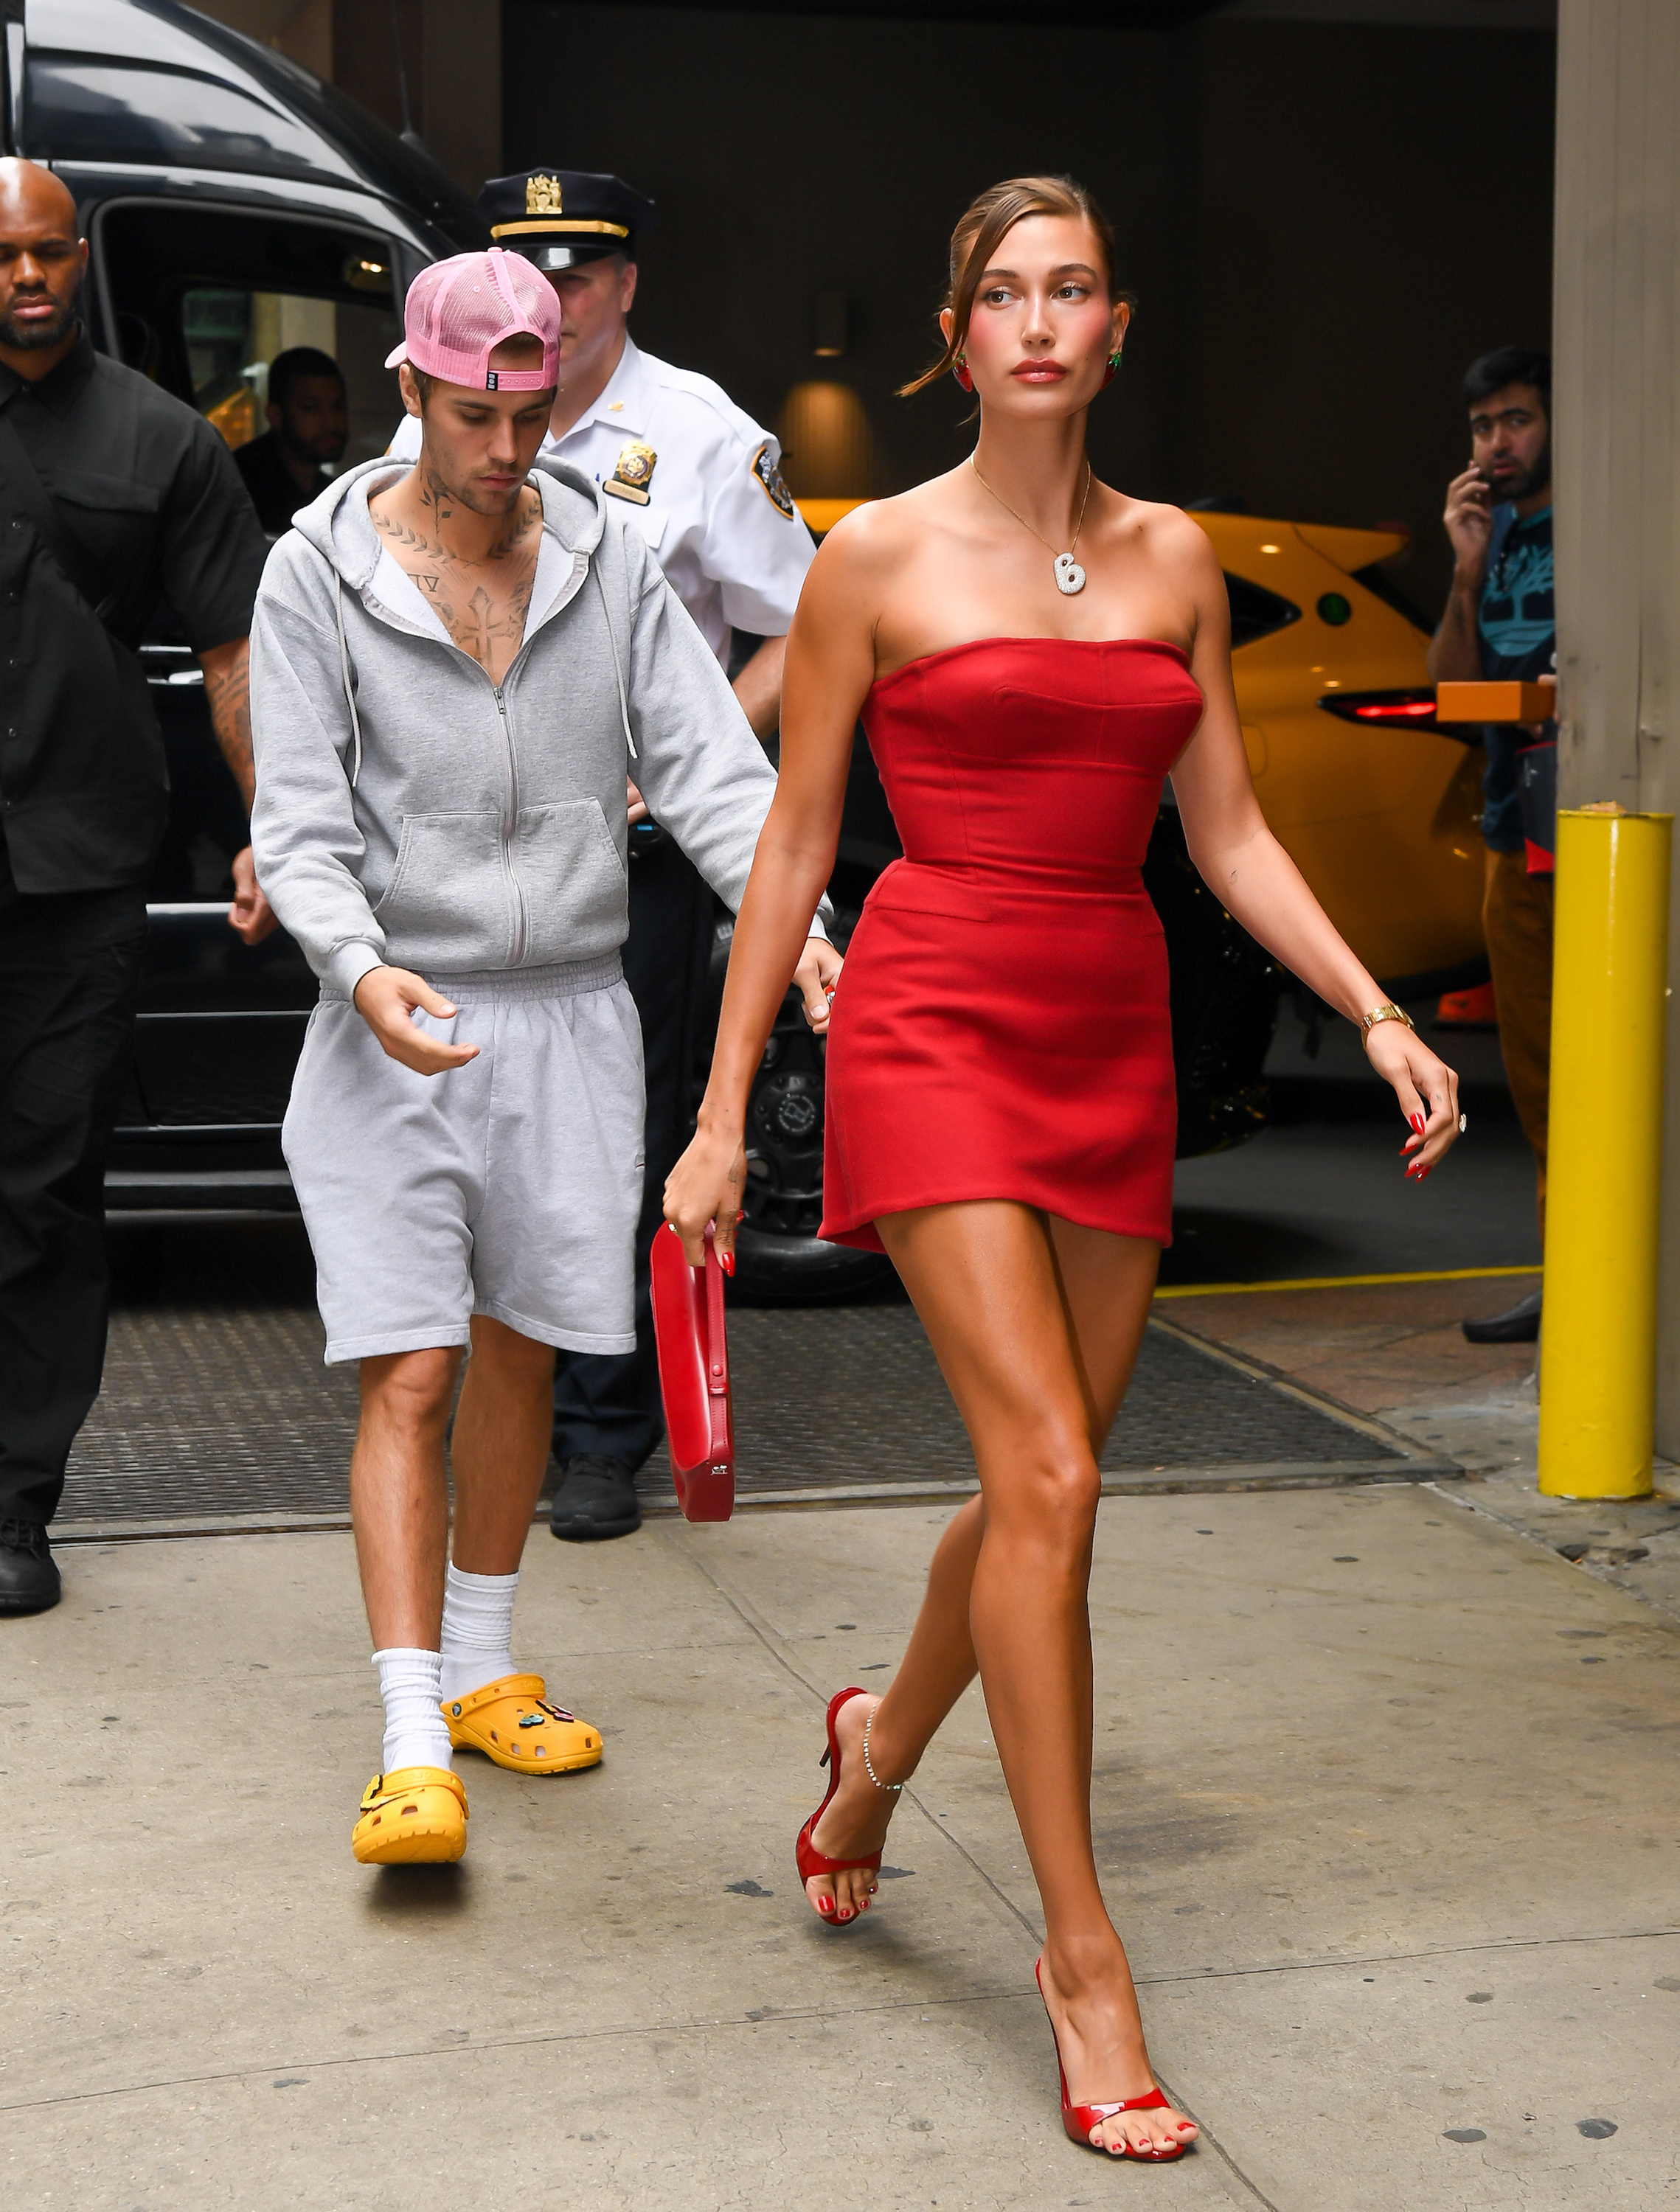 Hailey previously wore tight outfits while out in public